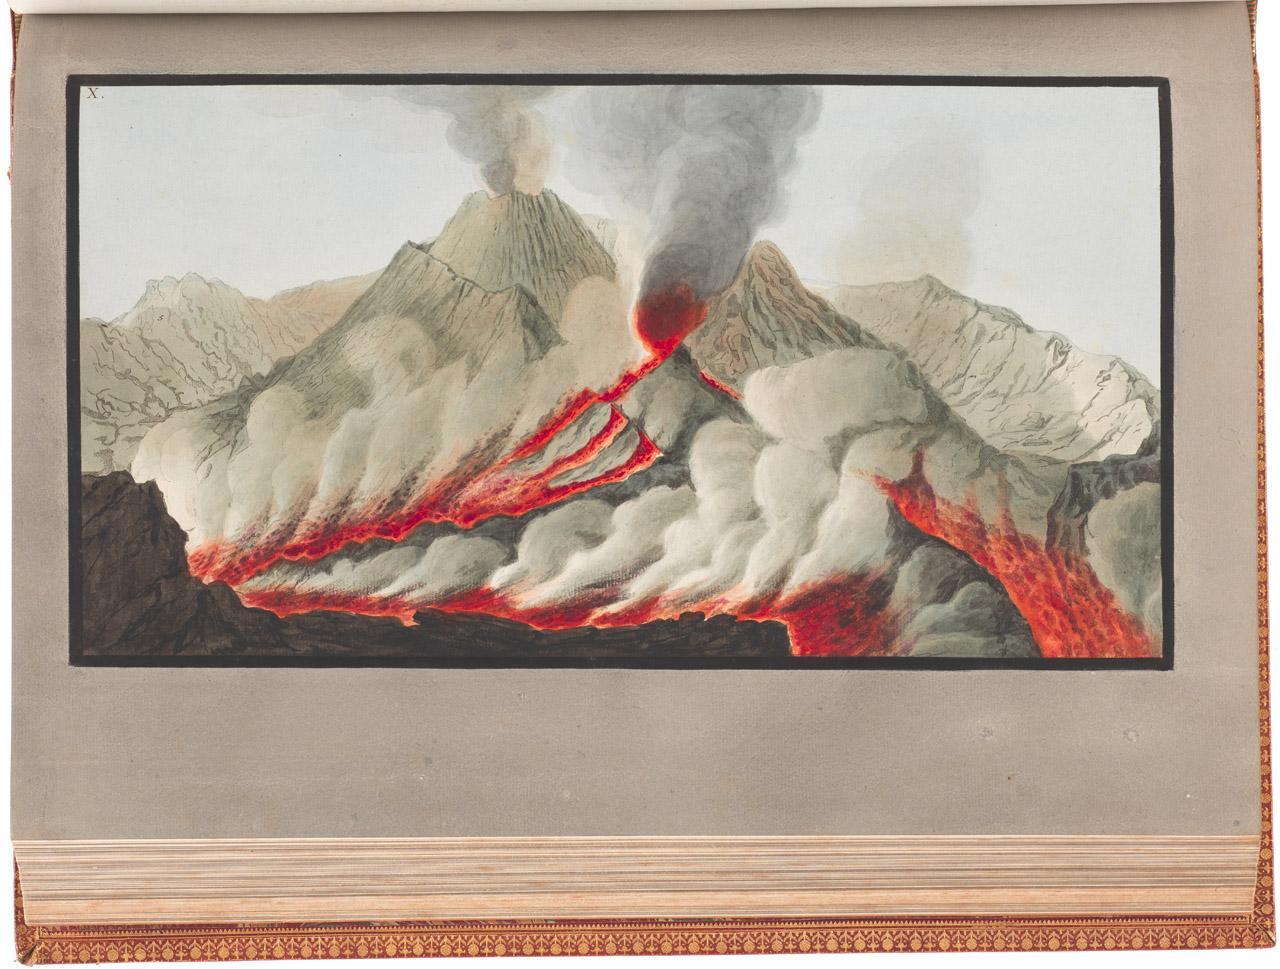 A colour drawing of a volcanic eruption taken from Hamilton's Campi Phlegraei 